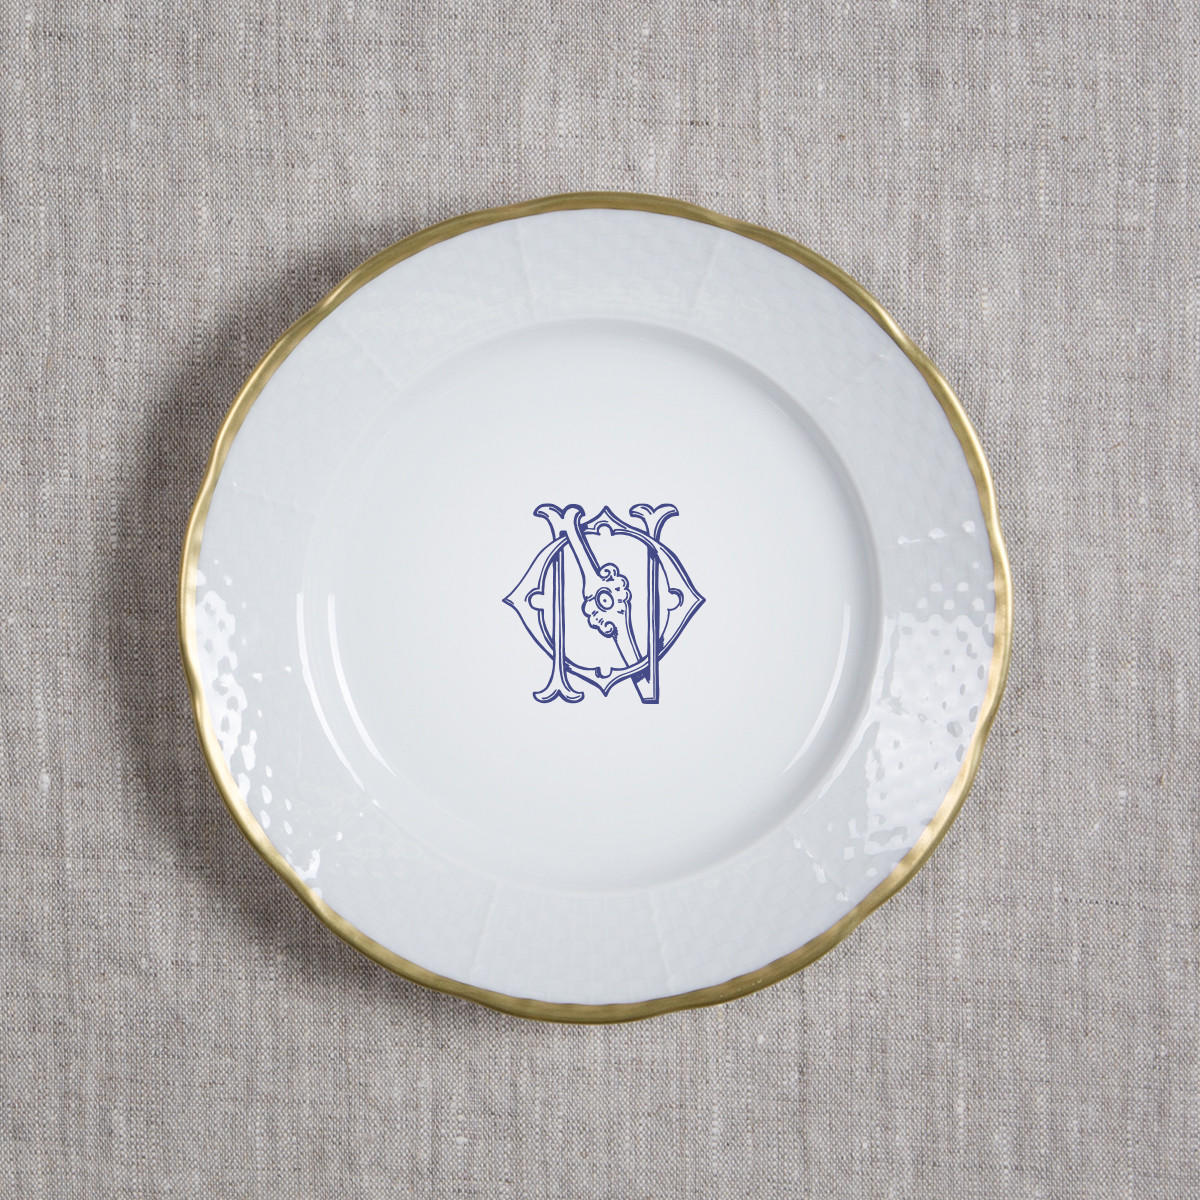 Anderson-o'neil Wedding Monogrammed Weave Gold Rimmed Salad Plate, ANDERSON-O'NEIL WEDDING MONOGRAMMED WEAVE GOLD RIMMED SALAD PLATE, Sasha Nicholas